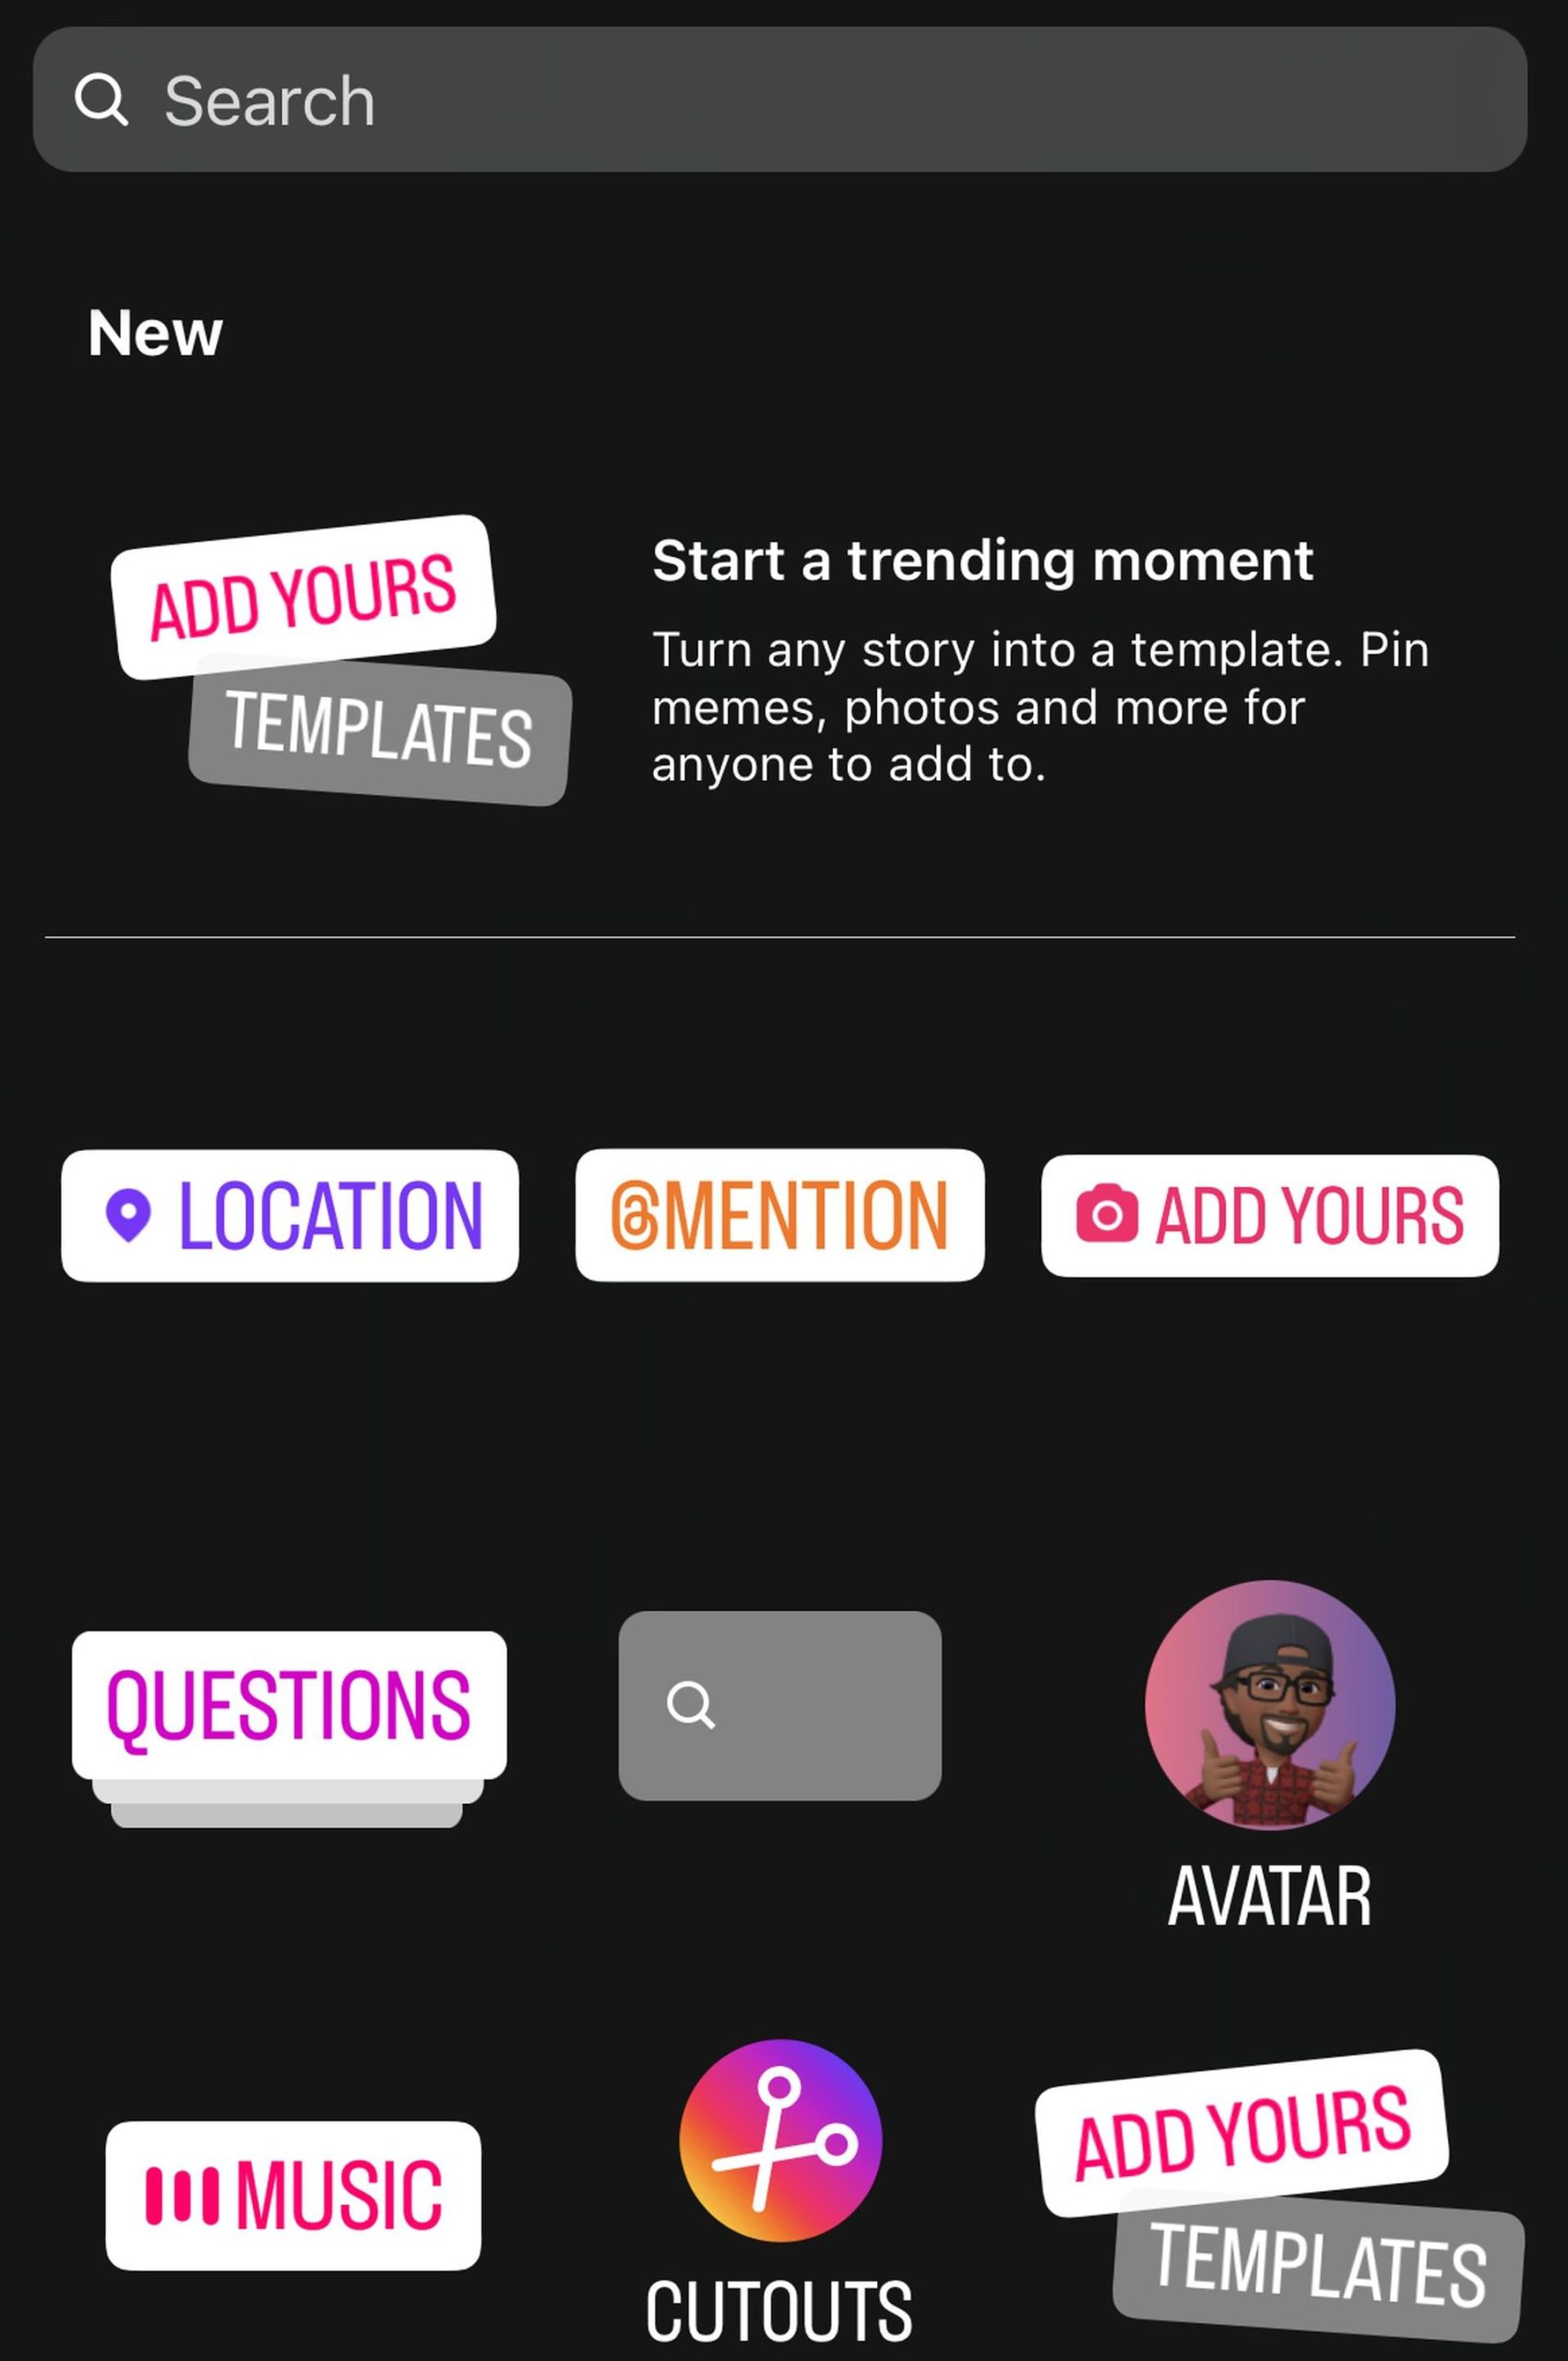 What is Instagram Add Yours feature?